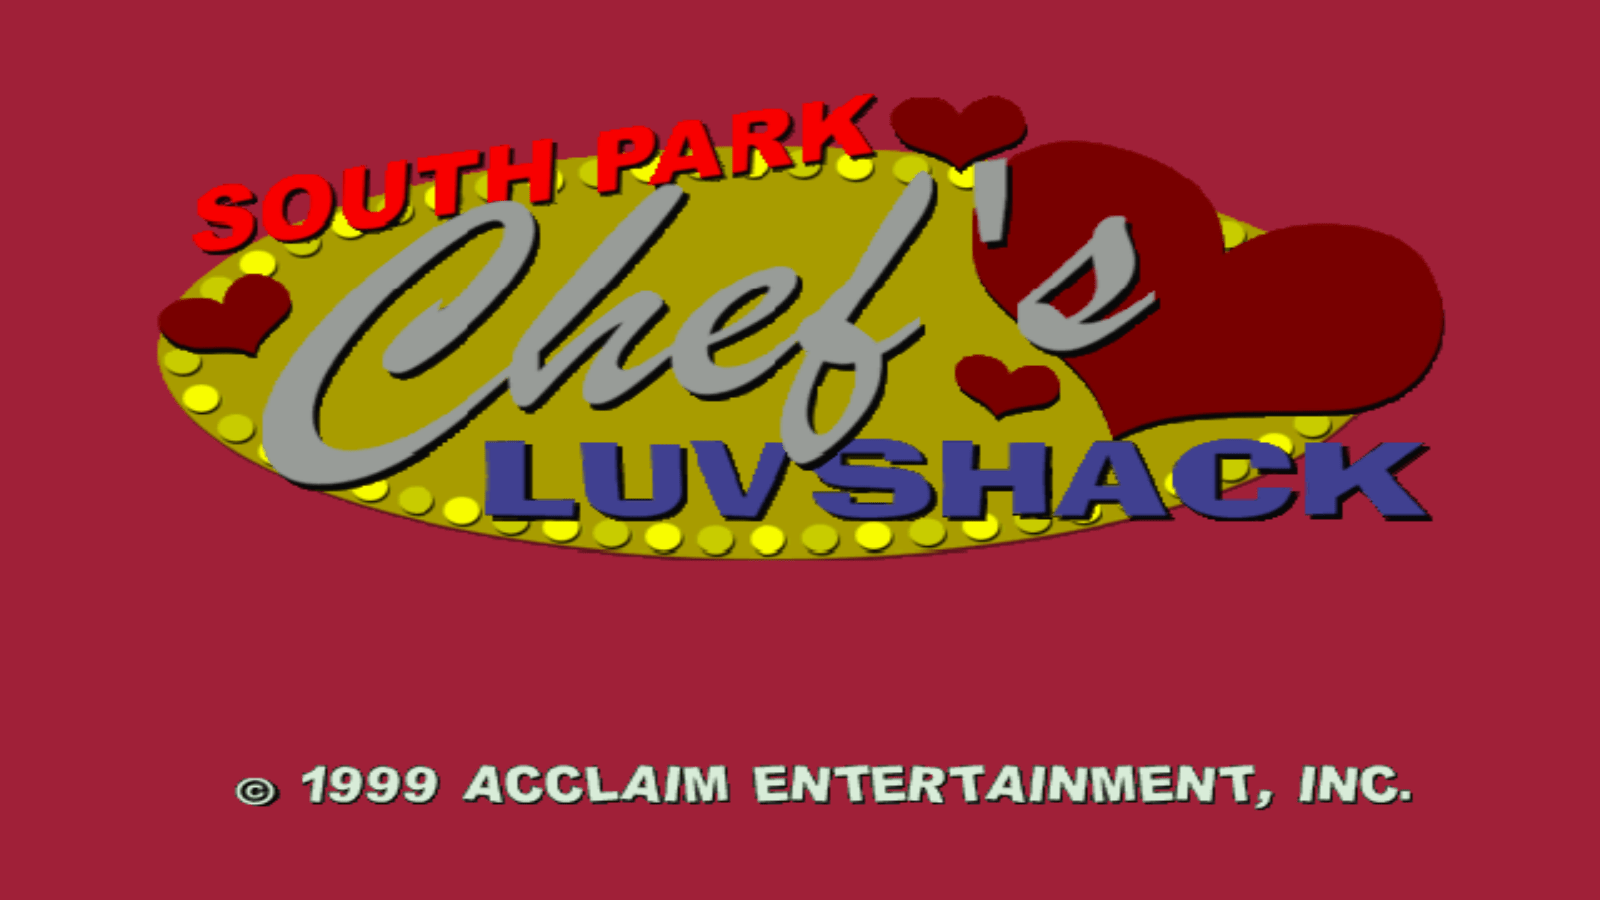 South Park Chef's Luvshack